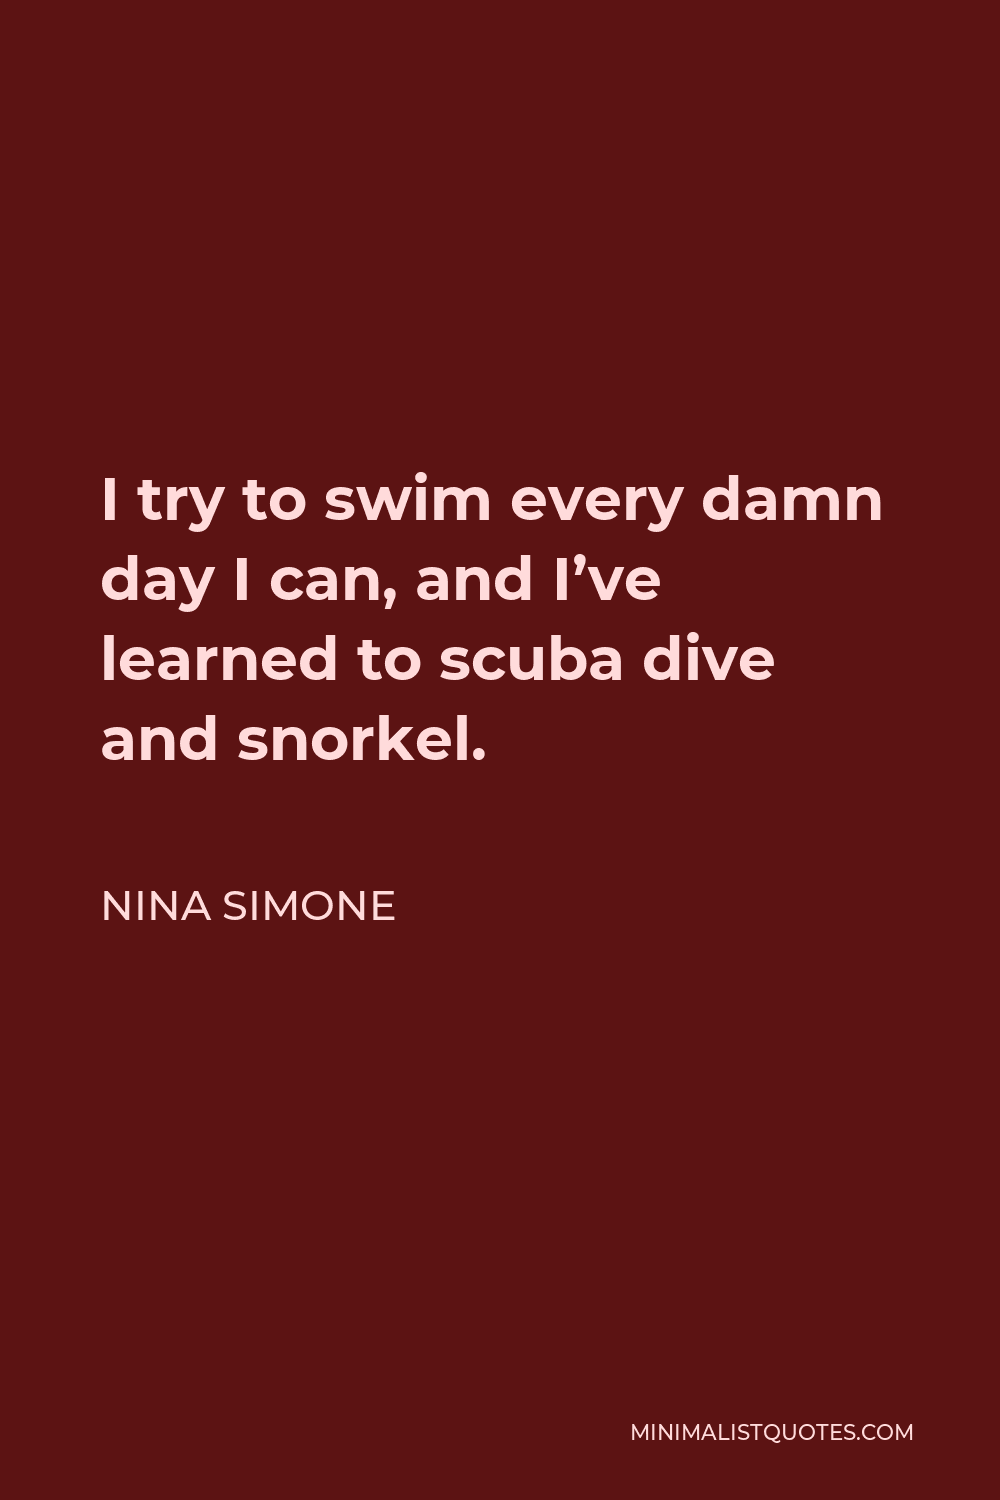 Nina Simone Quote - I try to swim every damn day I can, and I’ve learned to scuba dive and snorkel.